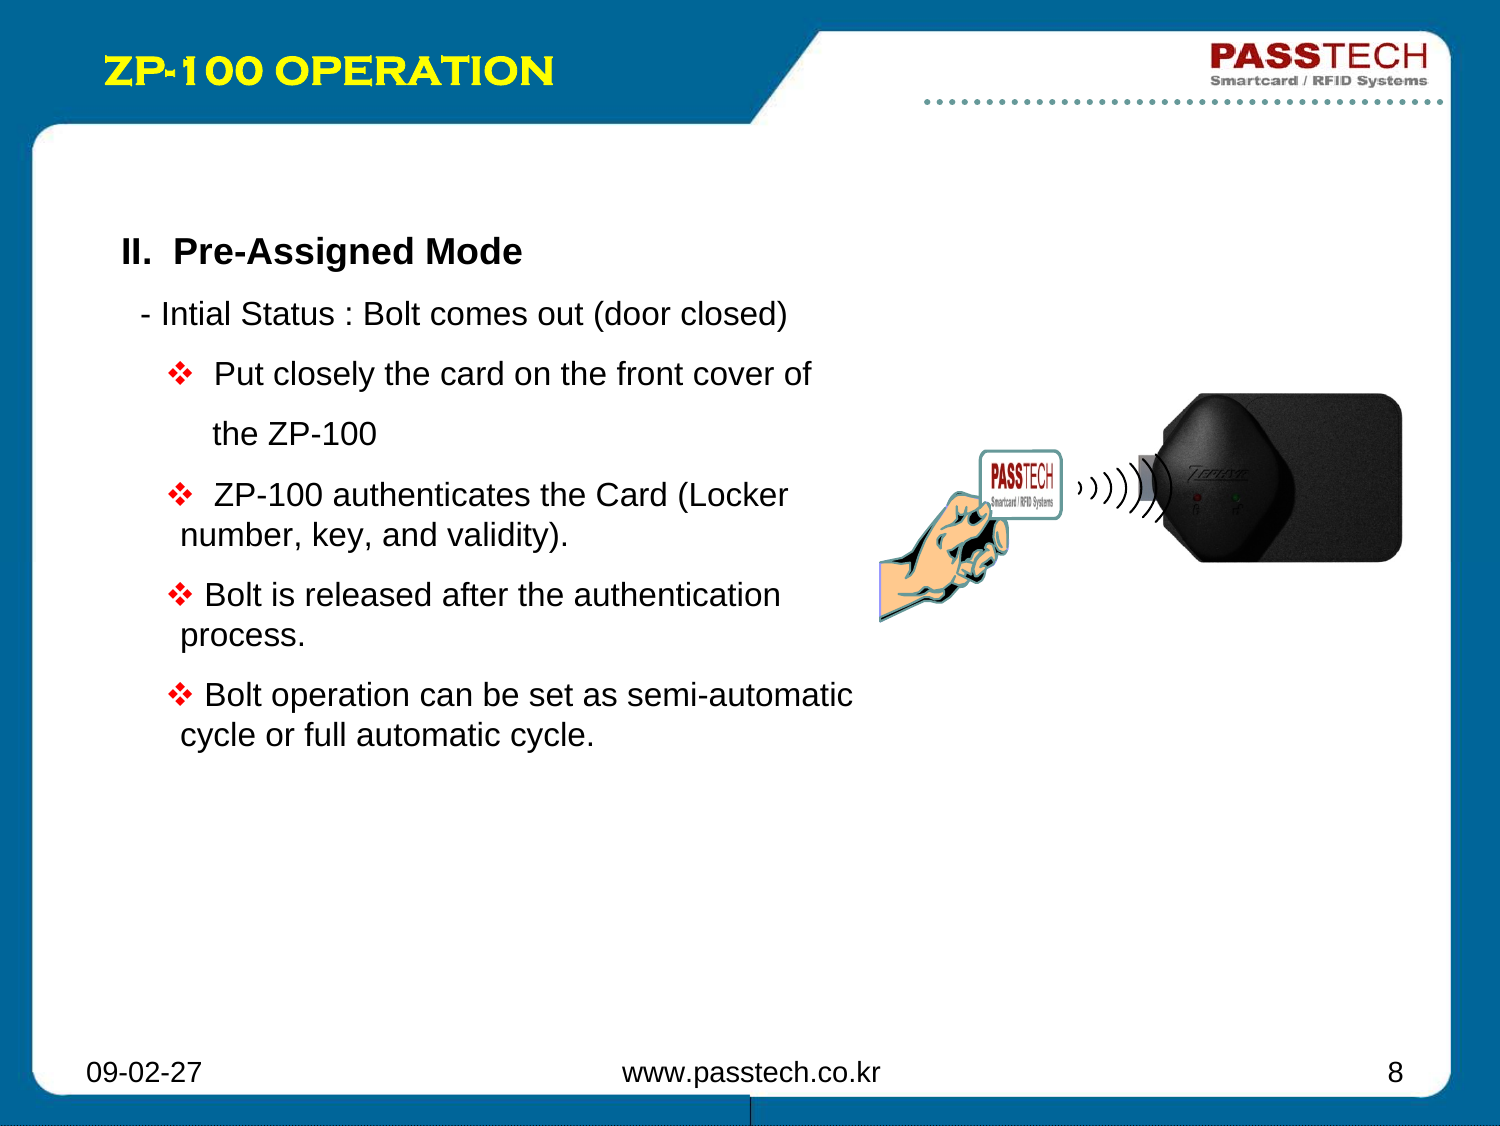 09-02-27 www.passtech.co.kr 8ZP-100 OPERATIONII.  Pre-Assigned Mode- Intial Status : Bolt comes out (door closed)Put closely the card on the front cover of  the ZP-100ZP-100 authenticates the Card (Locker  number, key, and validity).Bolt is released after the authentication process.Bolt operation can be set as semi-automatic cycle or full automatic cycle.